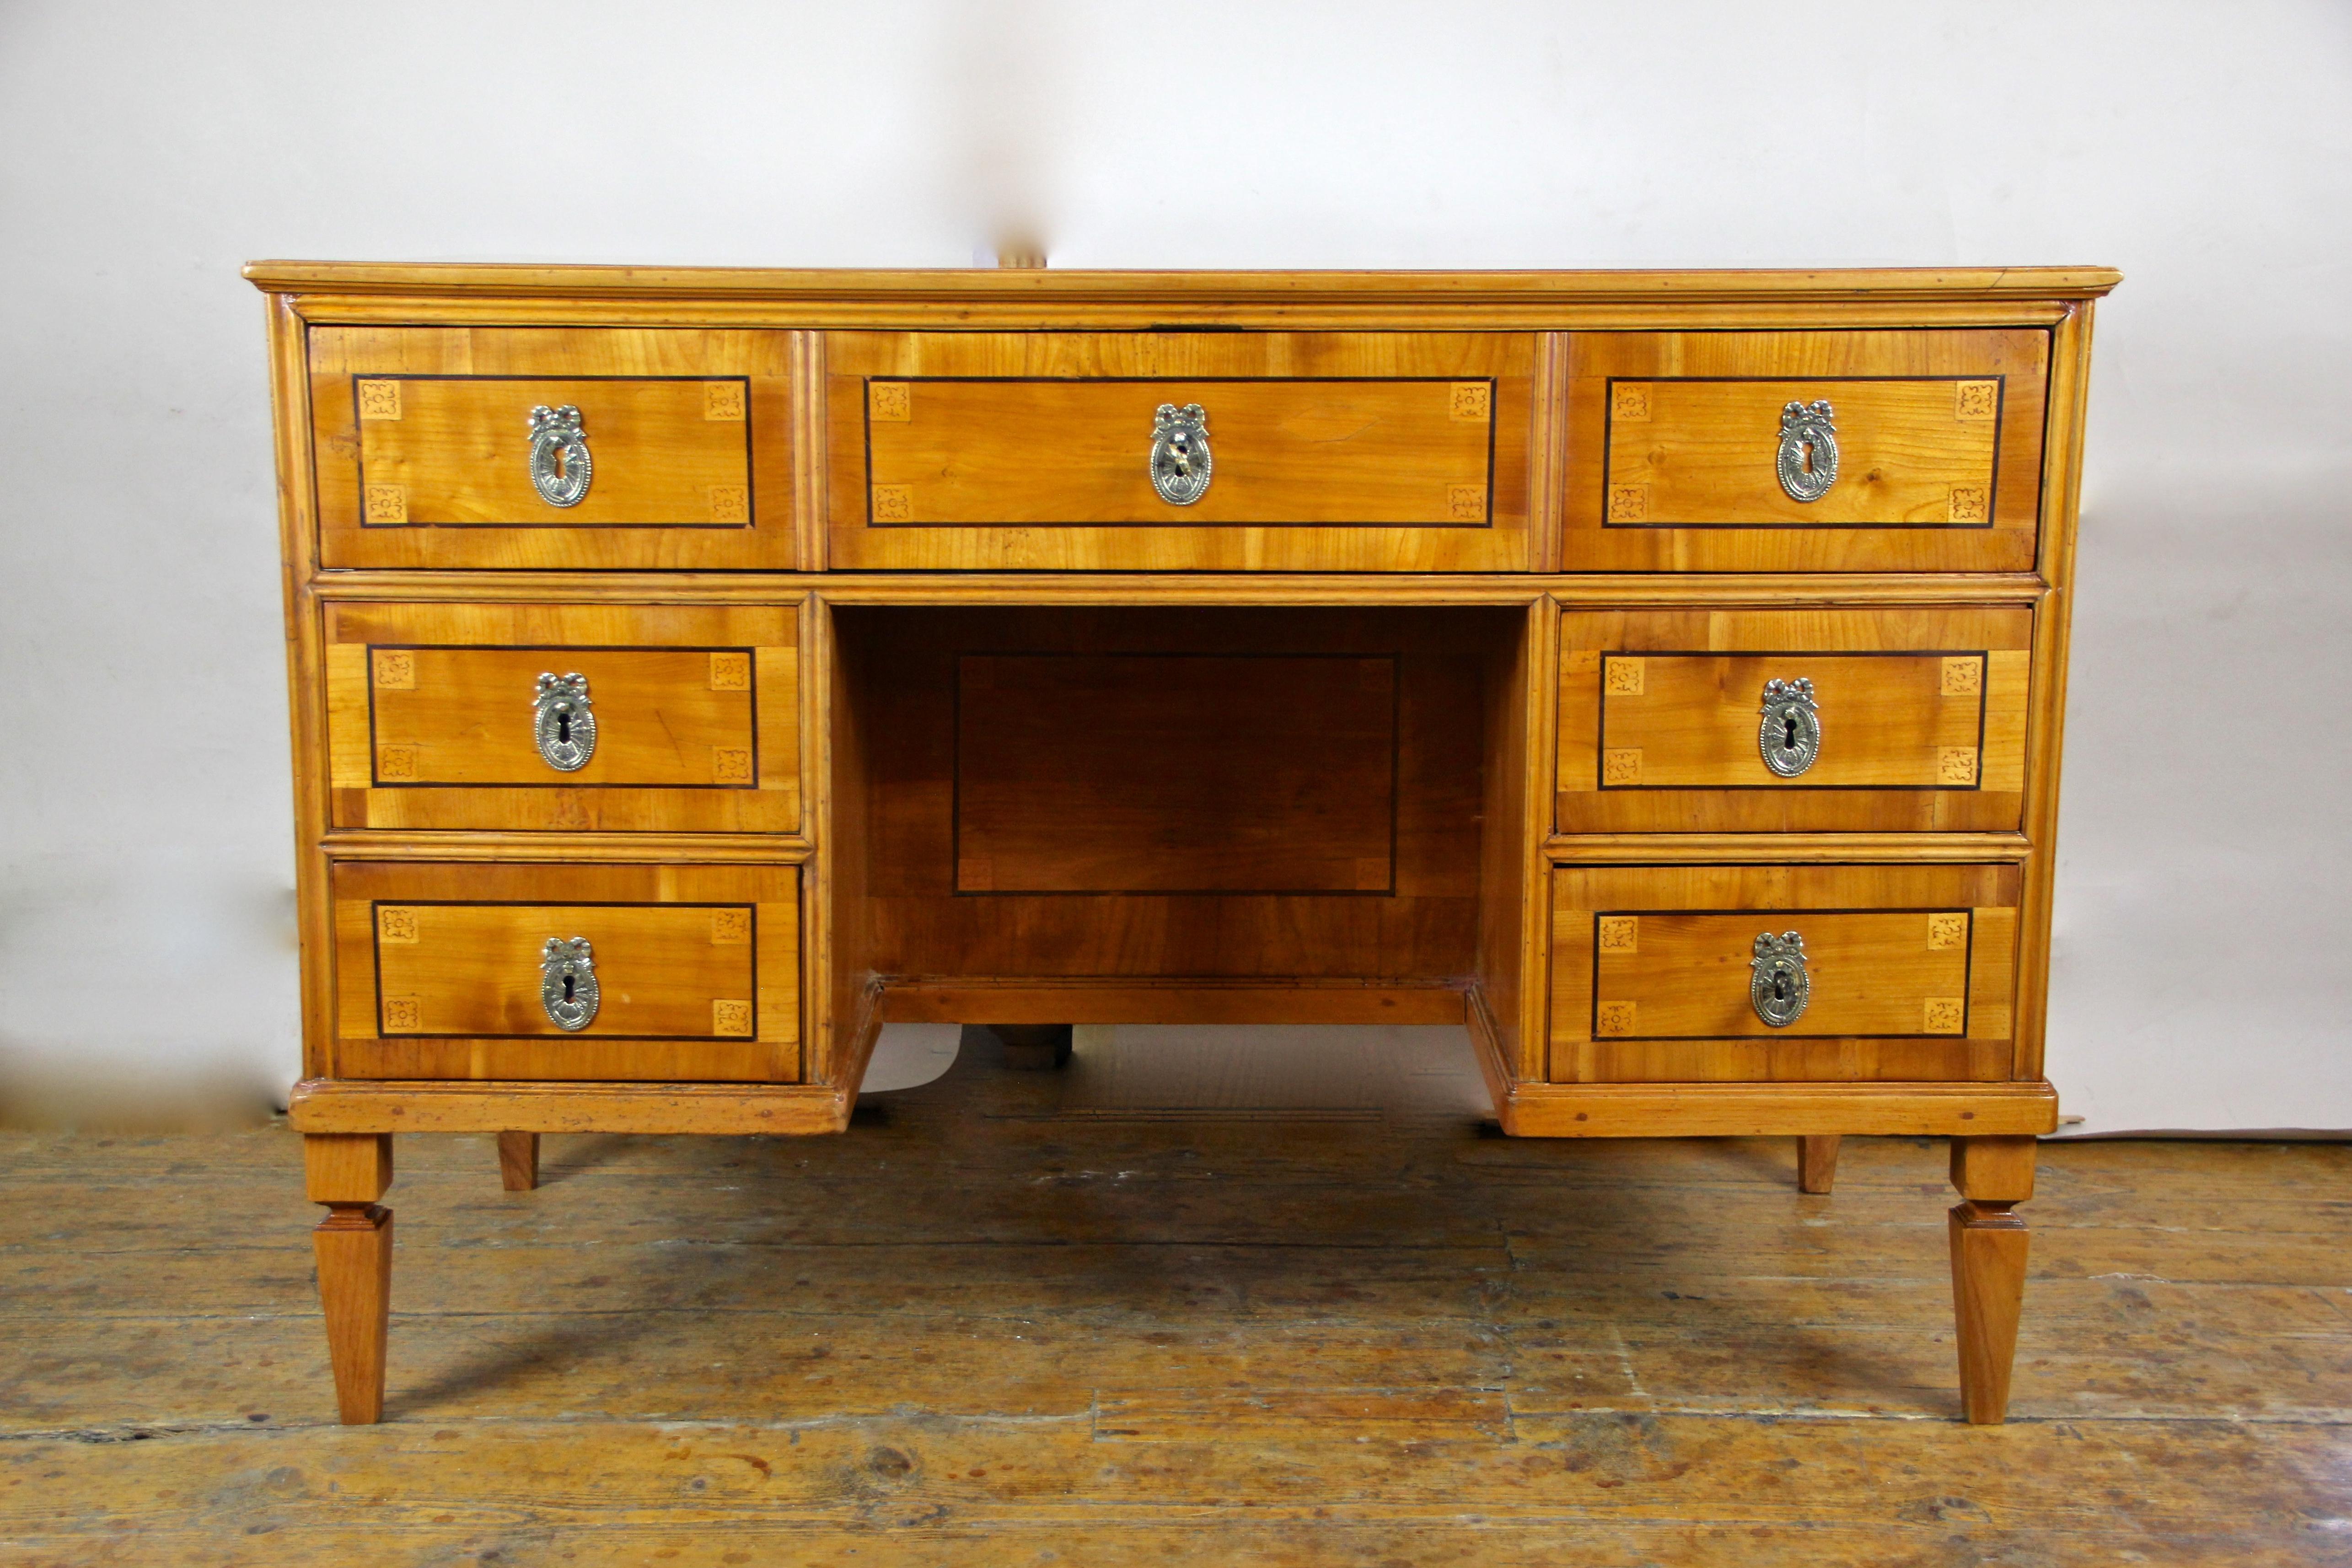 Splendid cherrywood writing desk with kneehole from the late 18th century in Austria, circa 1790. This over 220 year old writing desk from the so-called 